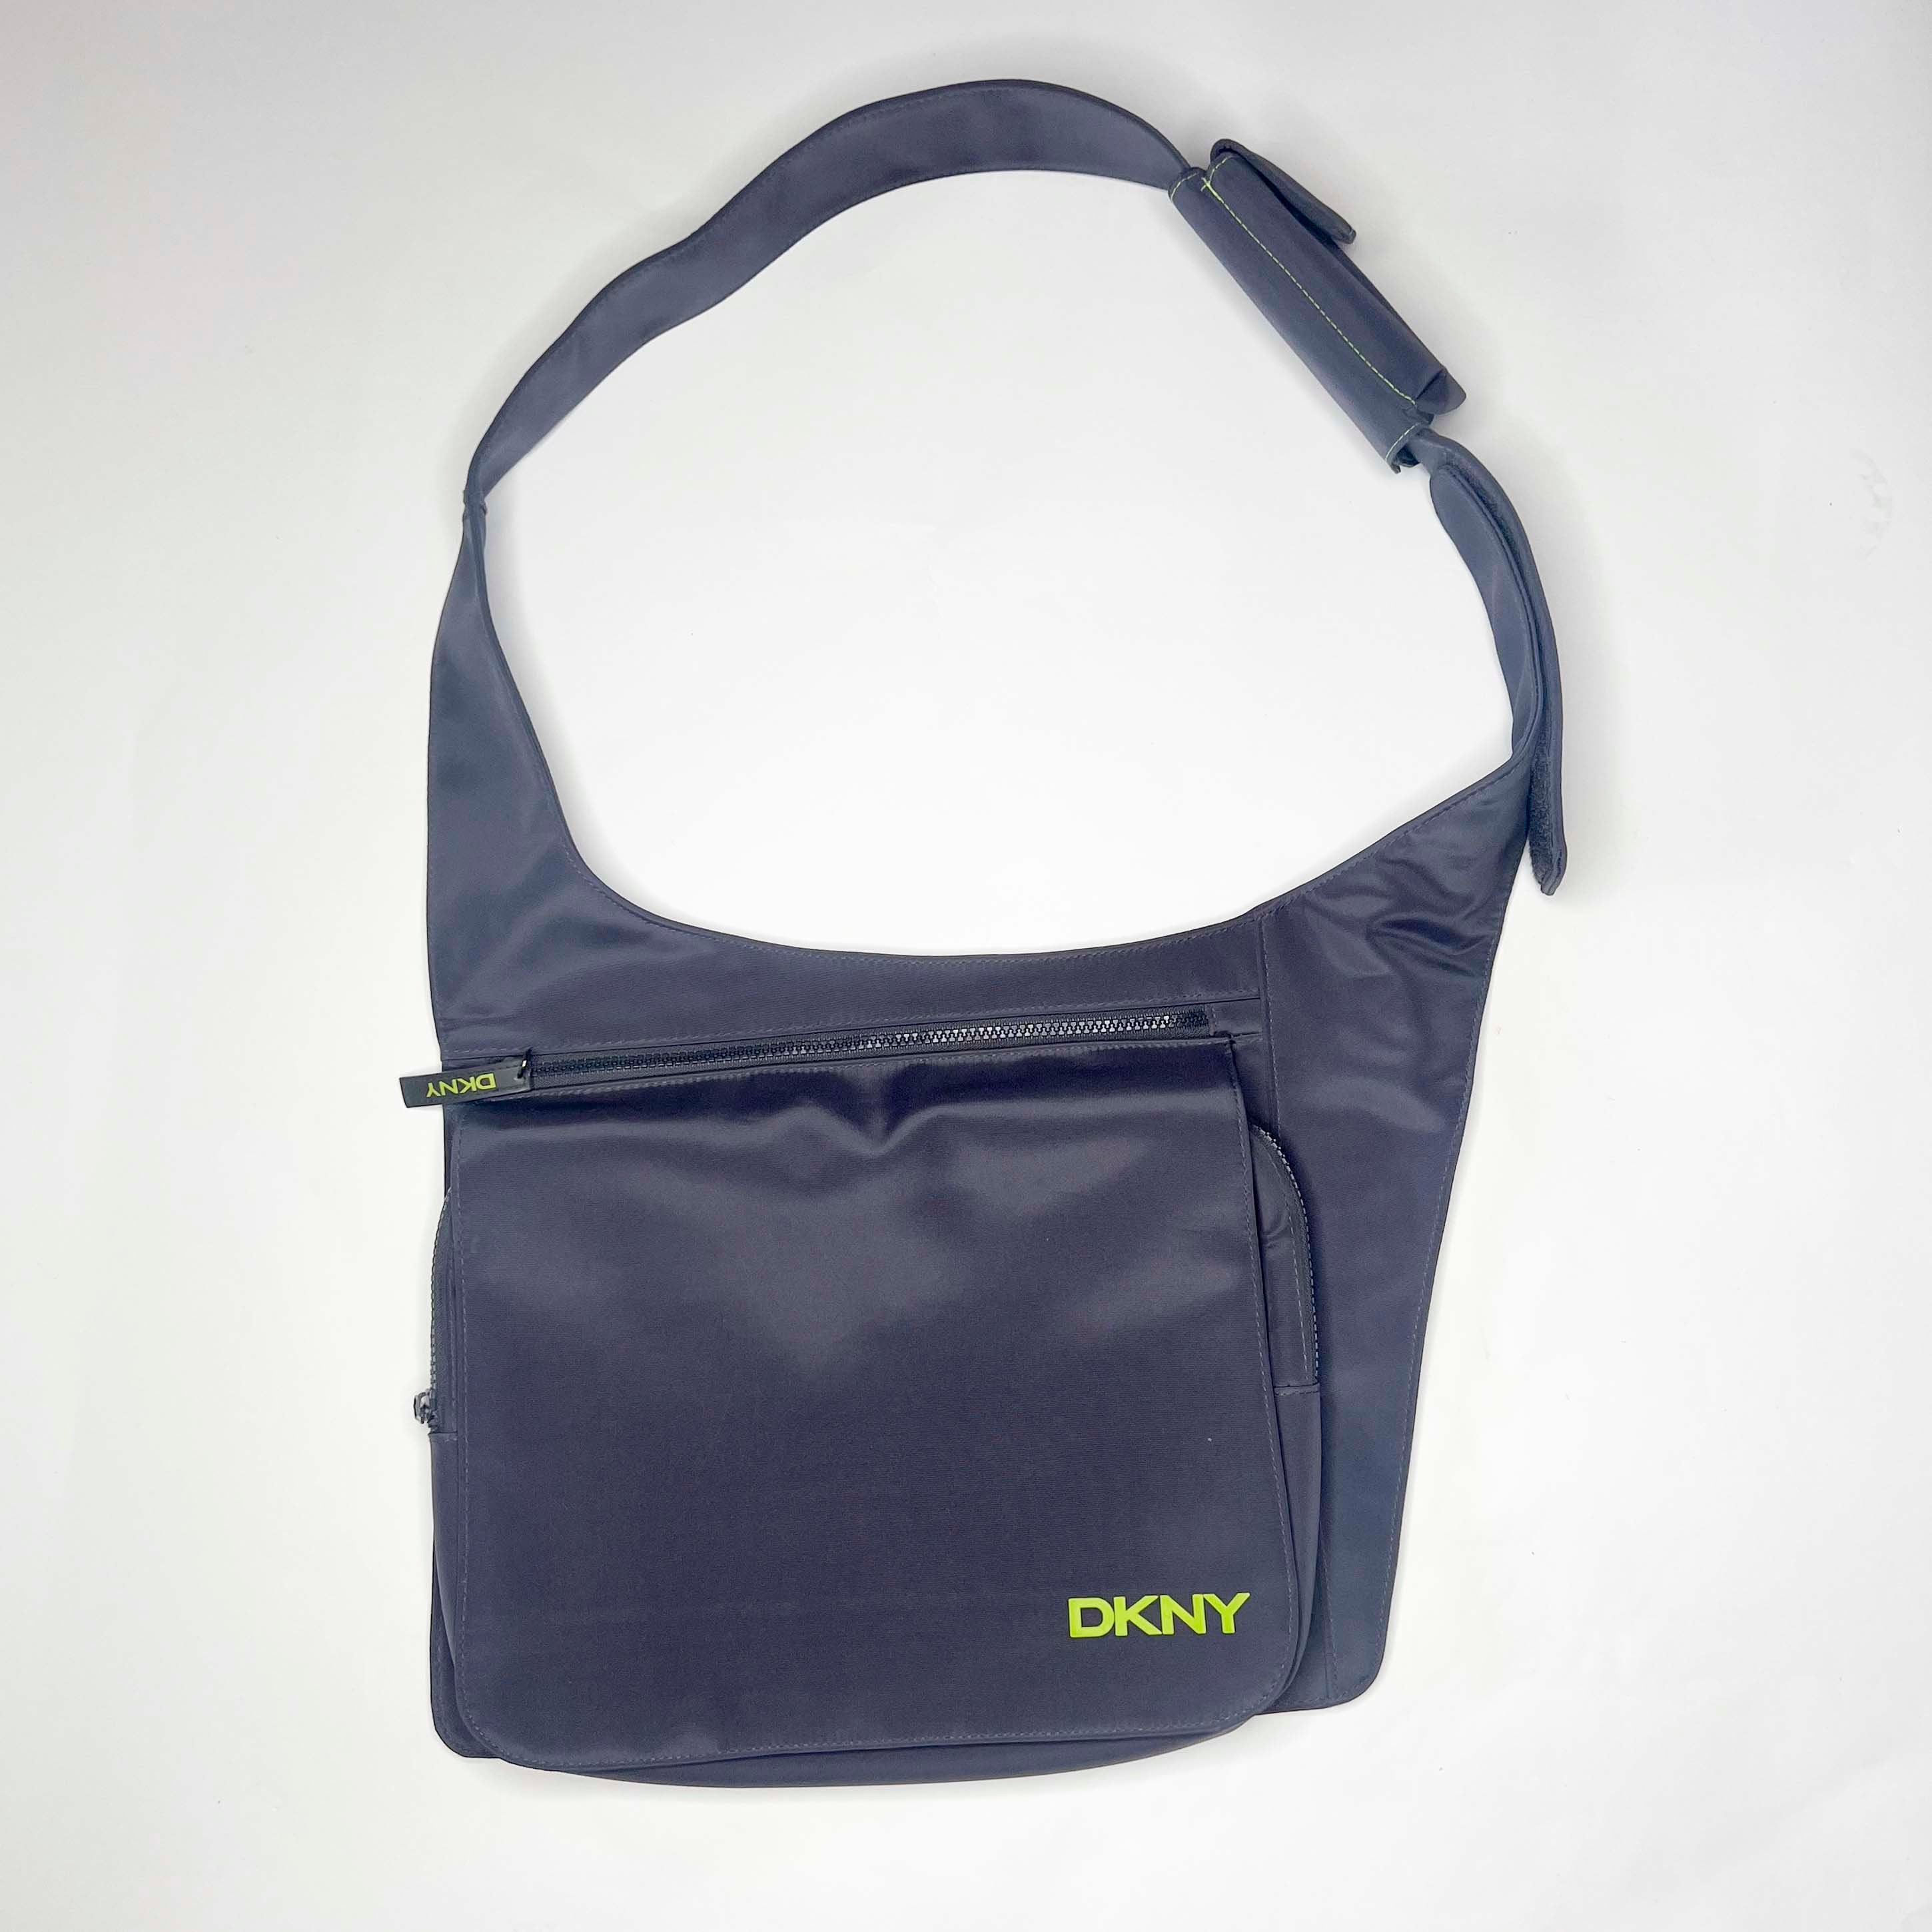 DKNY Clothing, Bags, Shoes & Home Décor